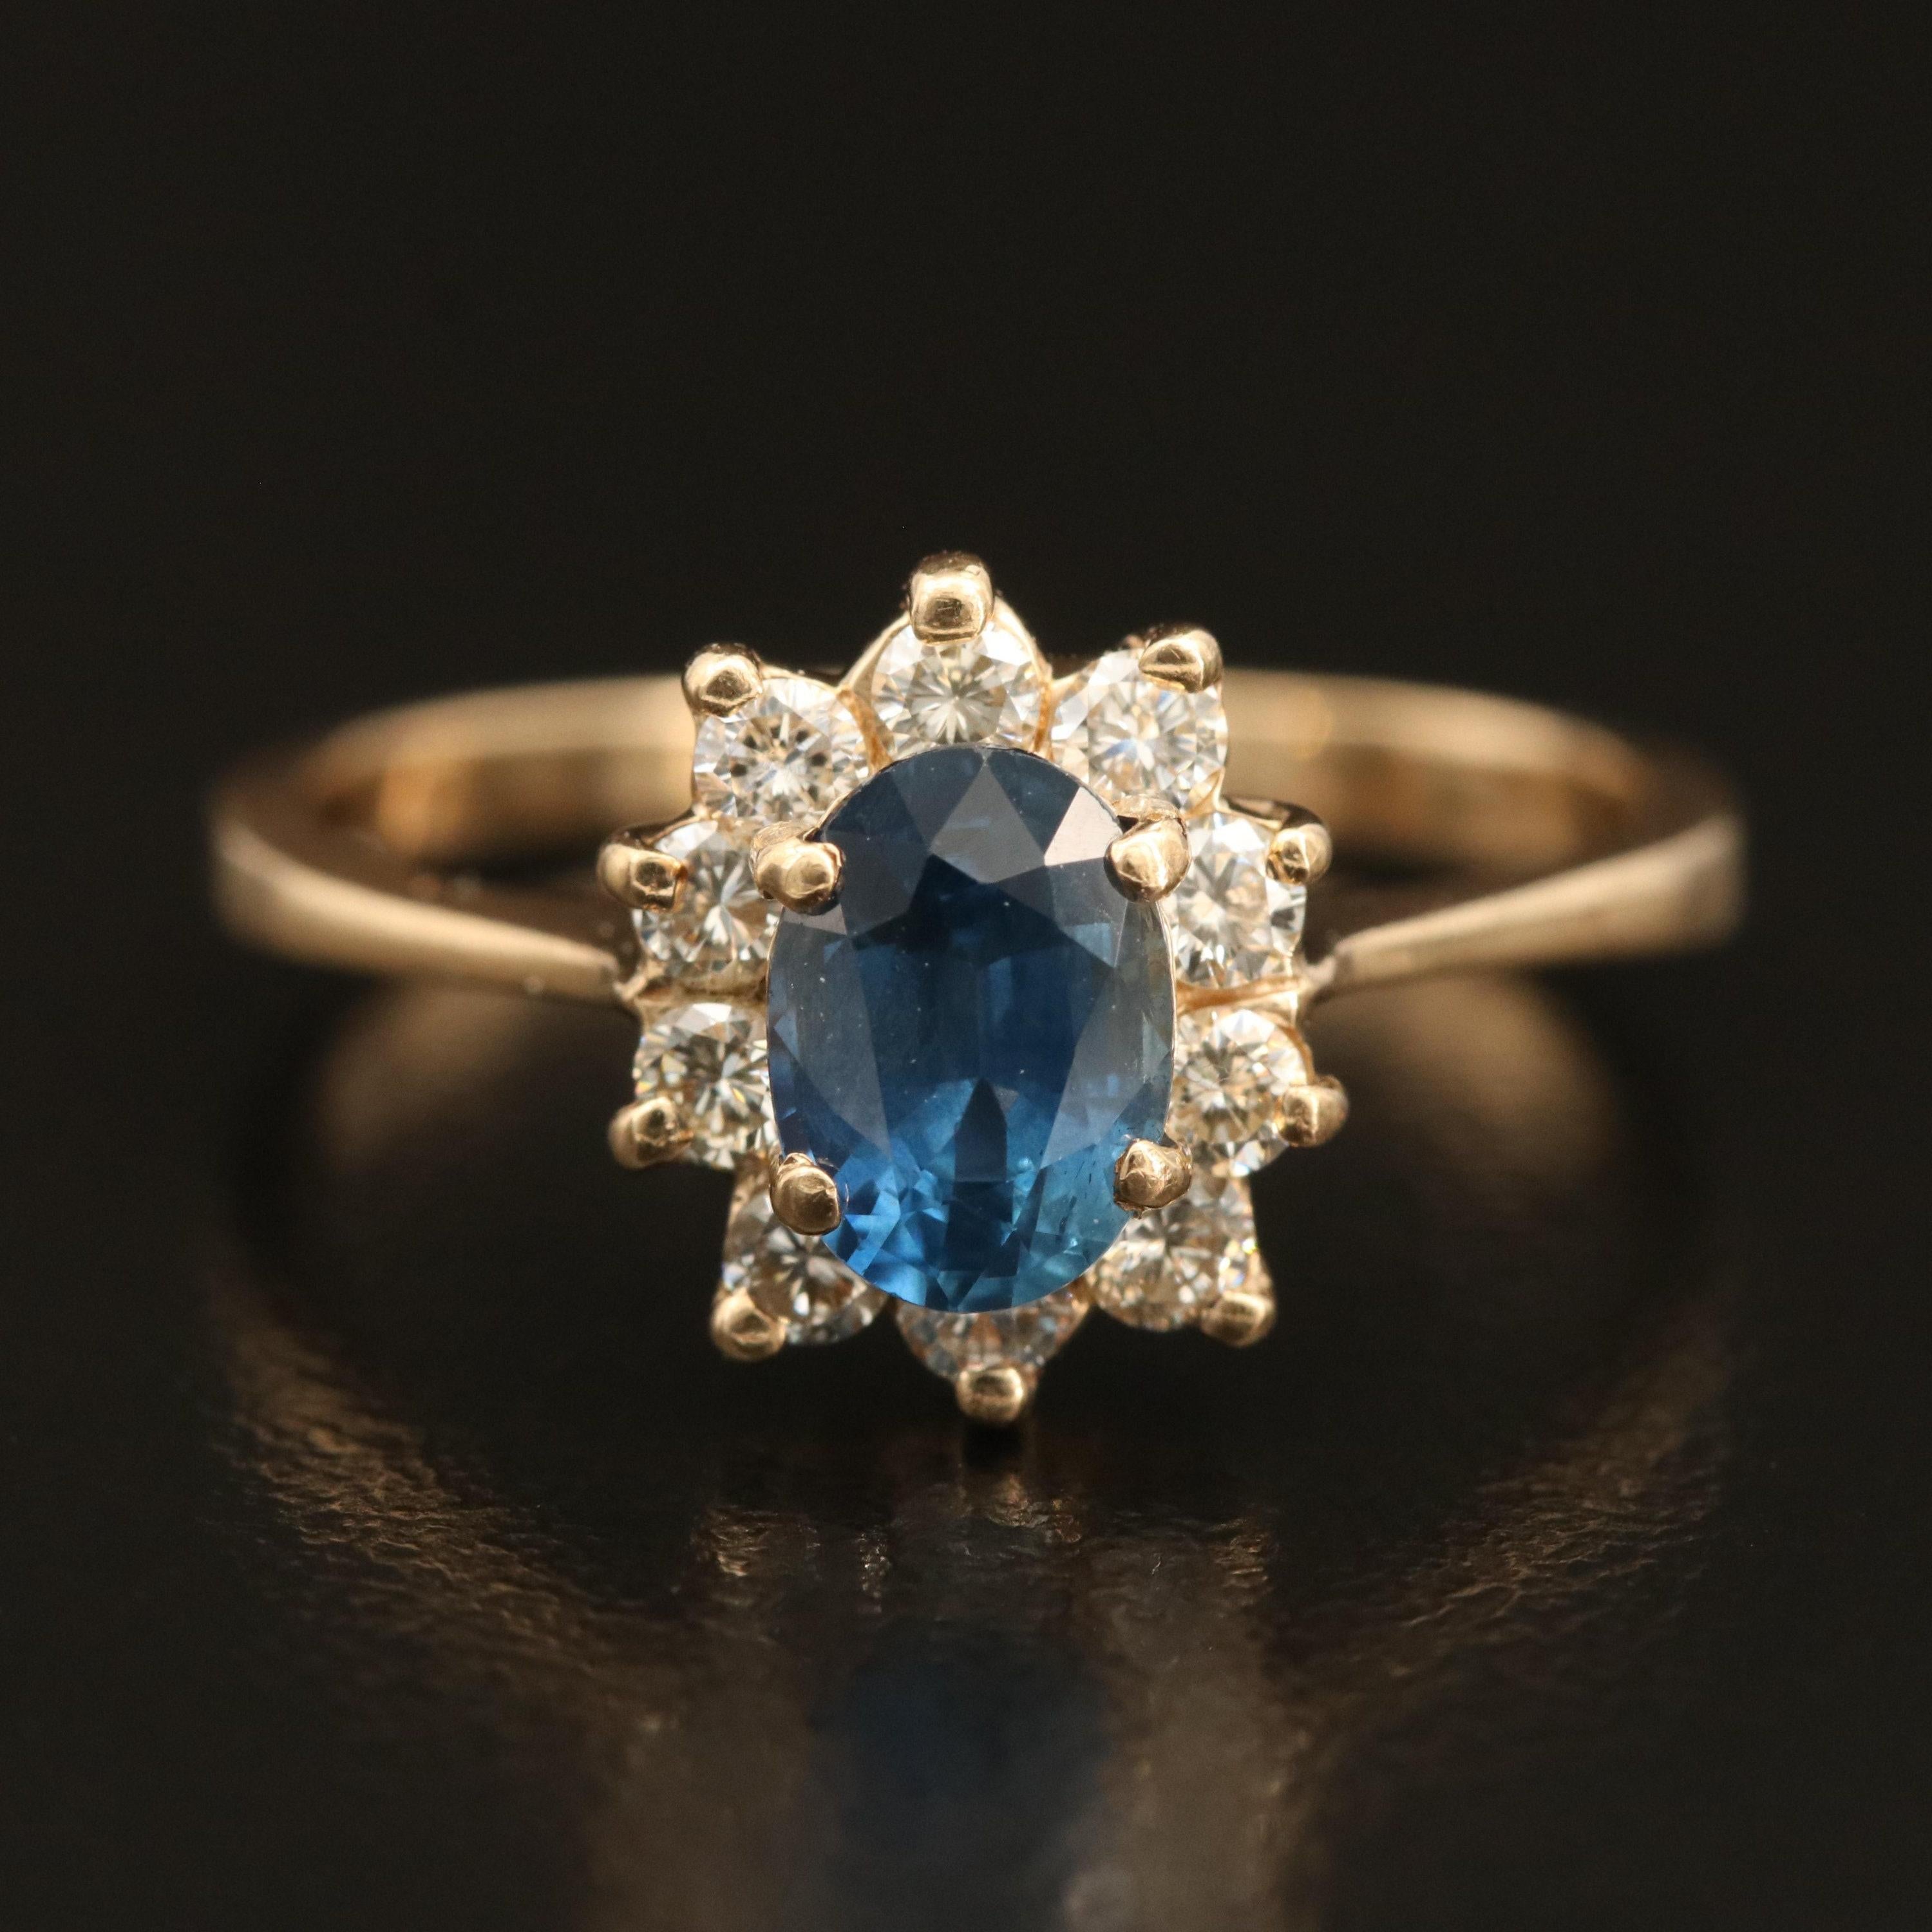 For Sale:  Unique Natural Sapphire Diamond Engagement Ring Set in 18K Gold, Cocktail Ring 6